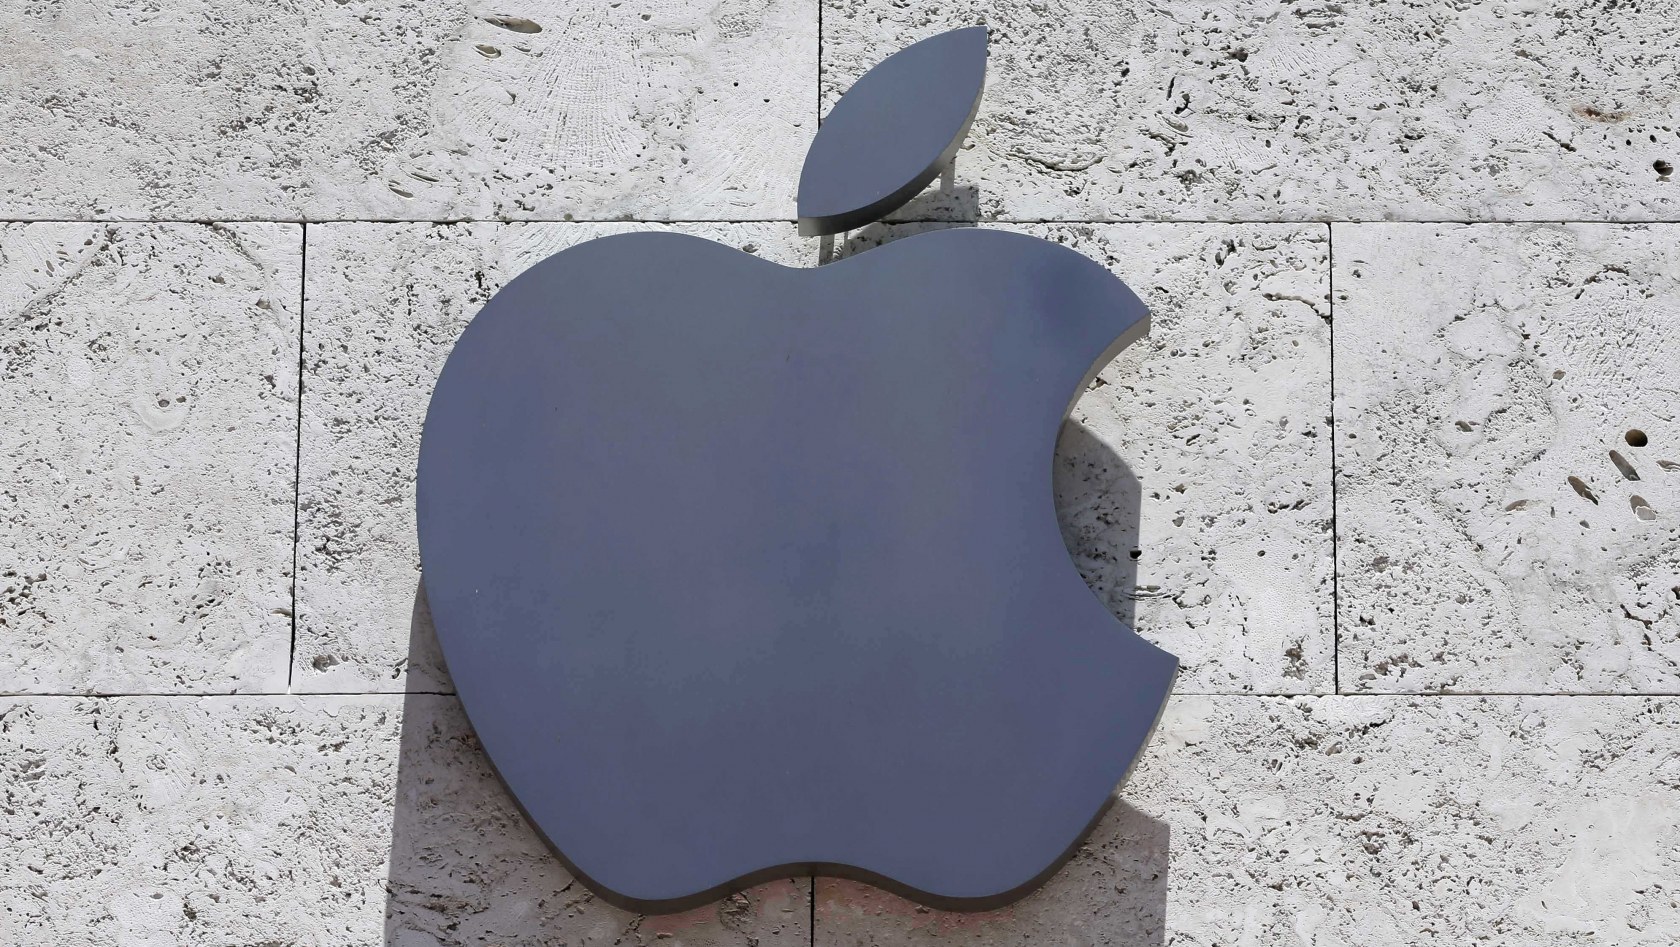 Apple tells employees to stop leaking information, in a leaked memo